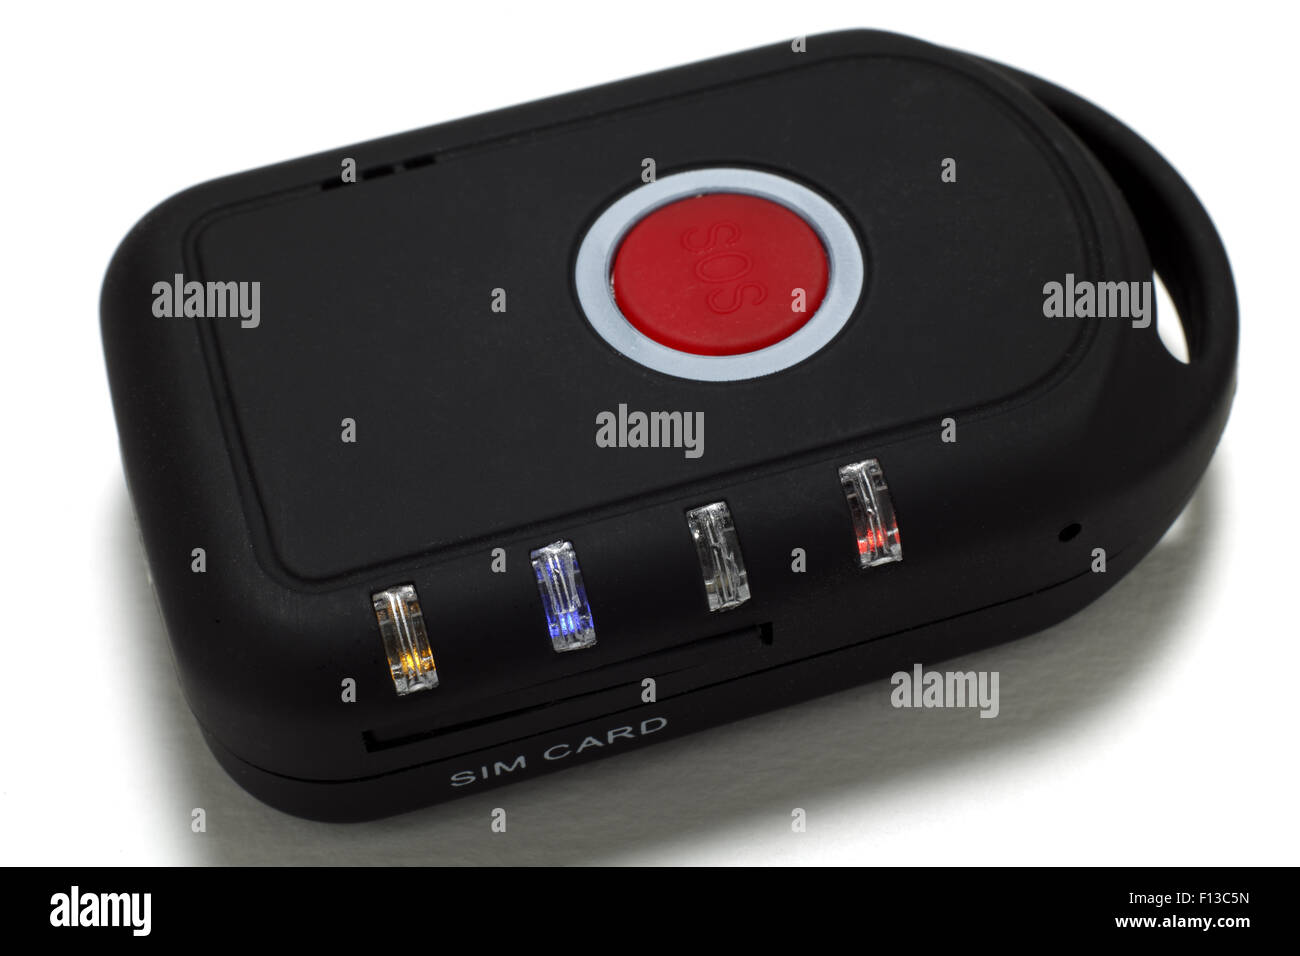 Personal GPS Tracker with panic button and listen in facility. Stock Photo